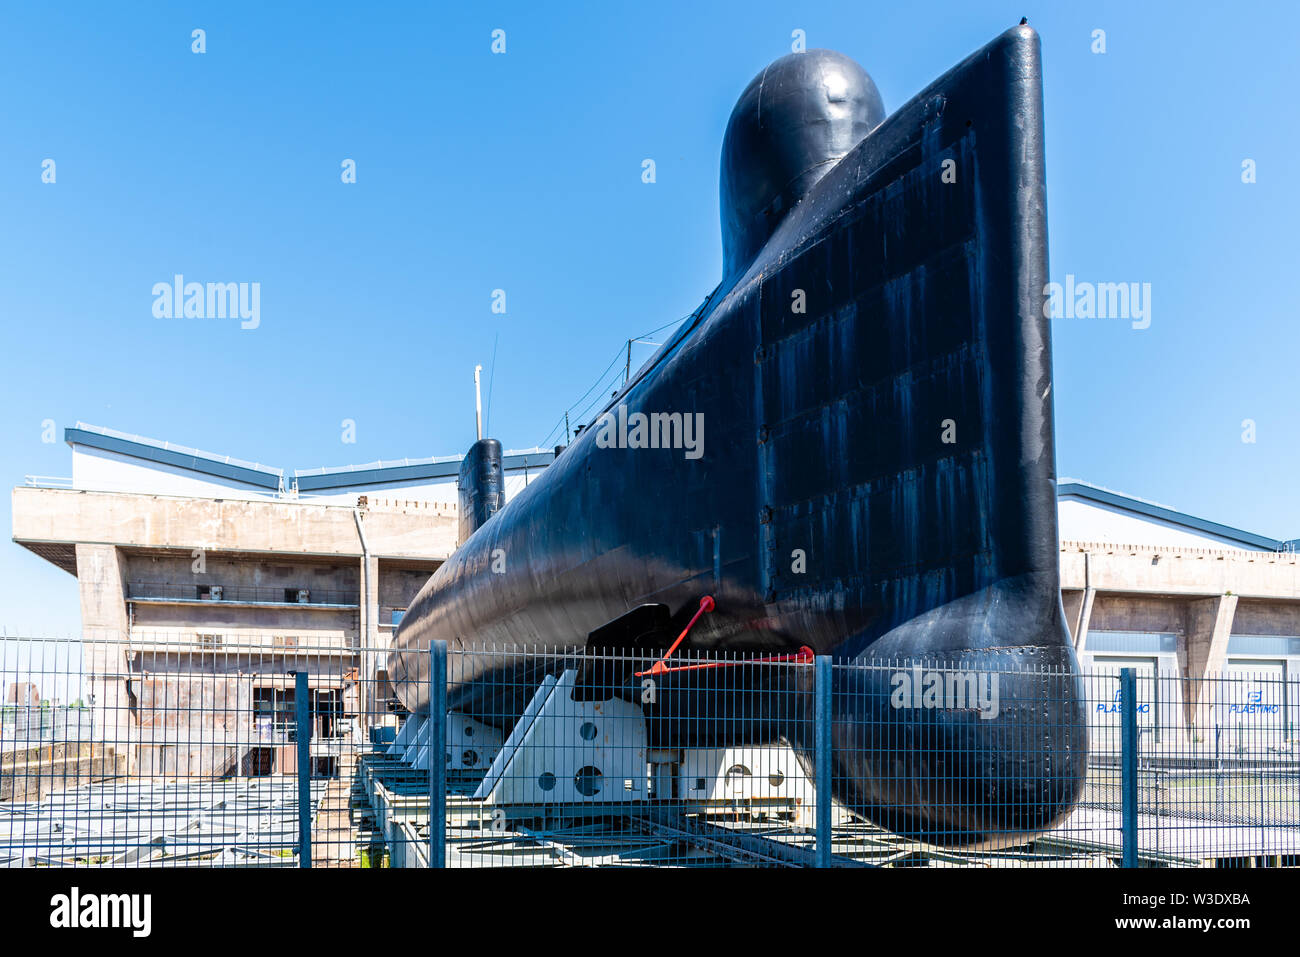 Lorient, France - August 3, 2018: Keroman Submarine Base. It was a German U-boat base located in Lorient during World War II Stock Photo